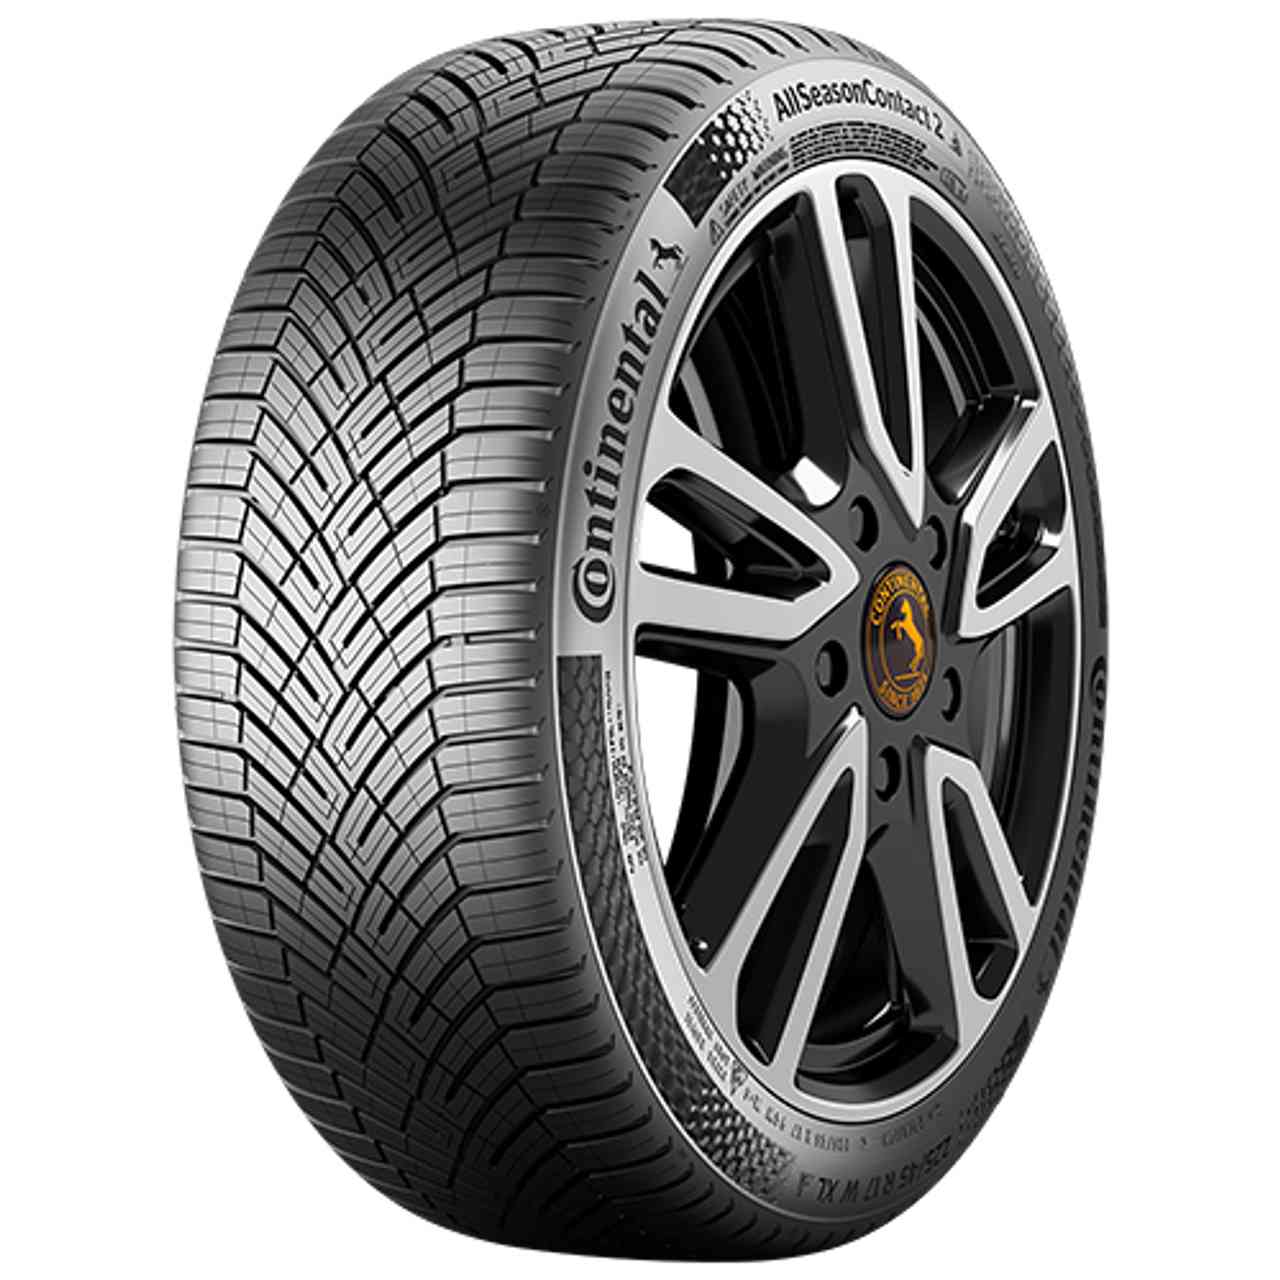 CONTINENTAL ALLSEASONCONTACT 2 (EVc) 235/60R18 107V BSW